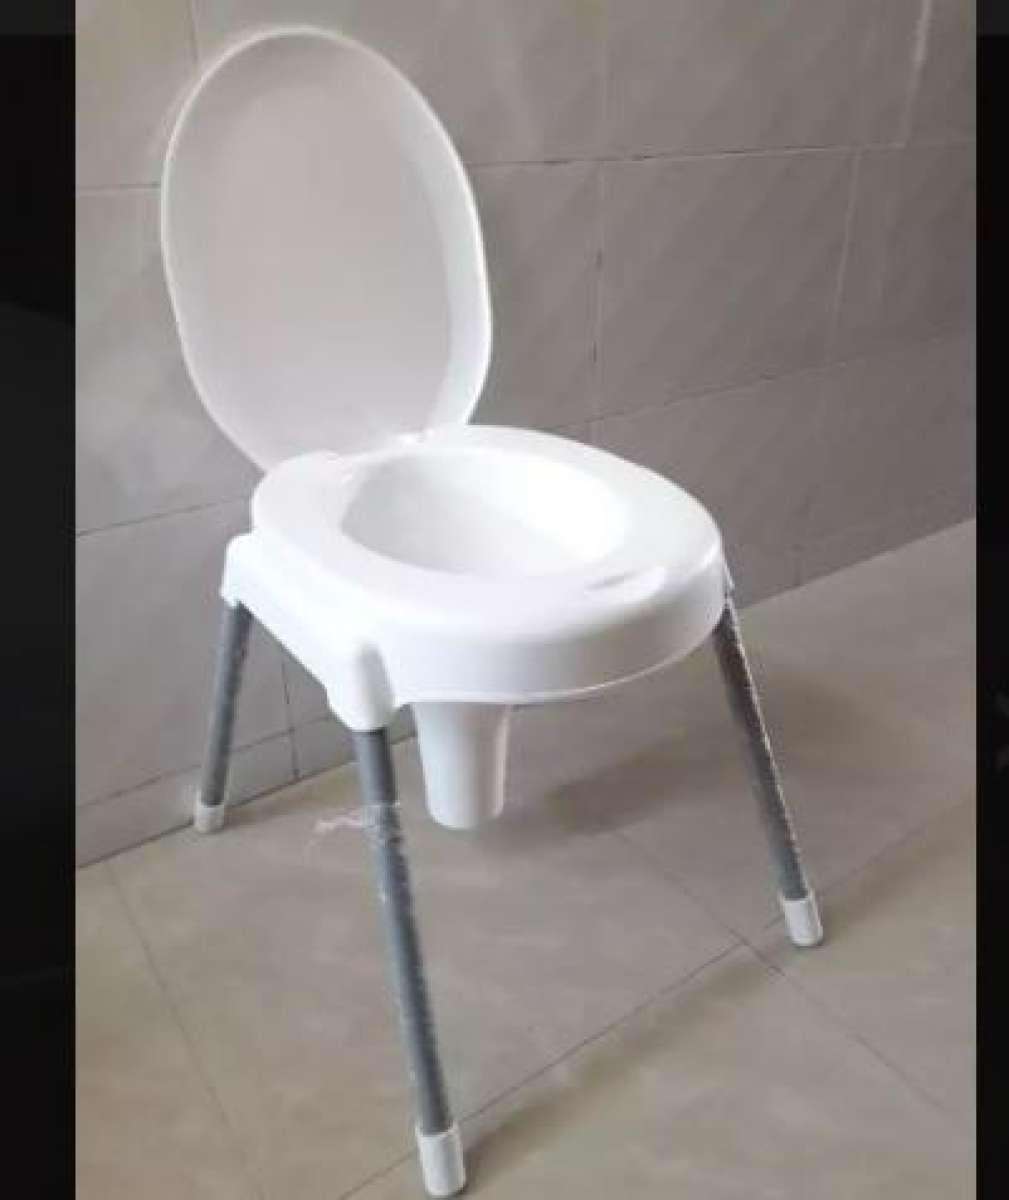 Portable Commode Chair New Condition Completely Lejao Shopping Store